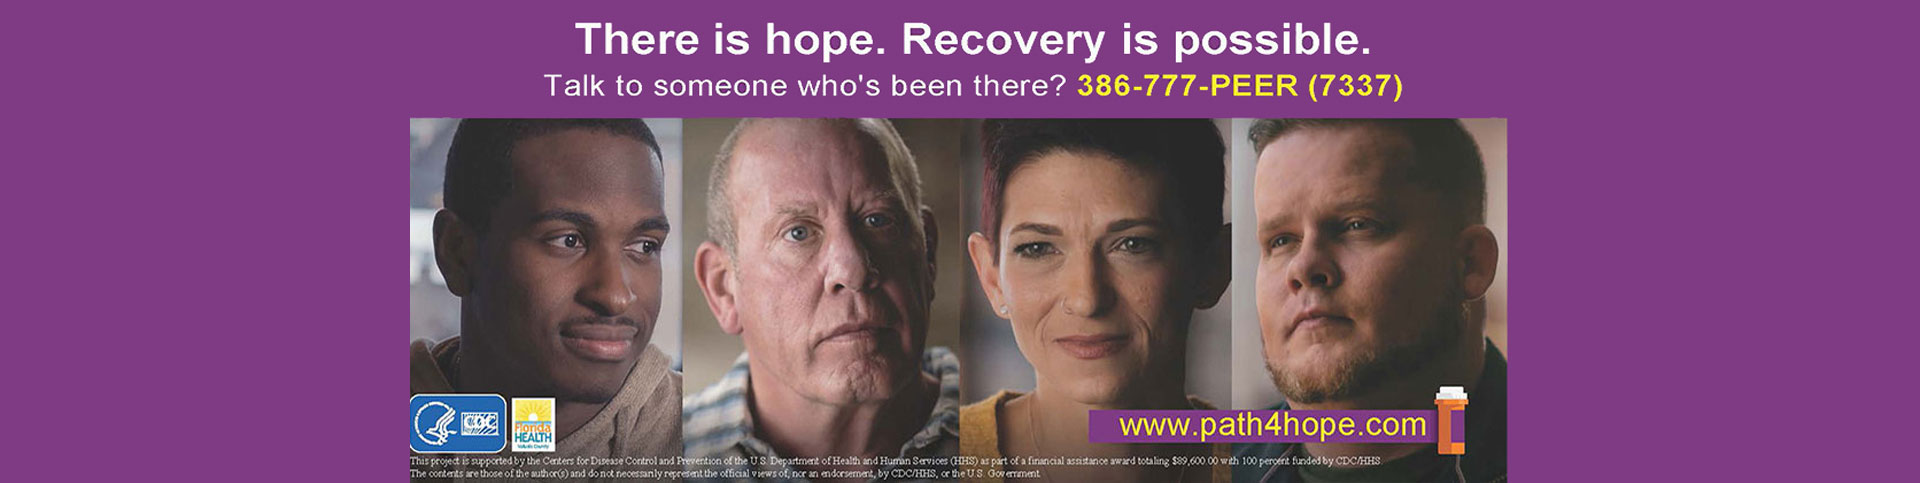 Recovery is possible.